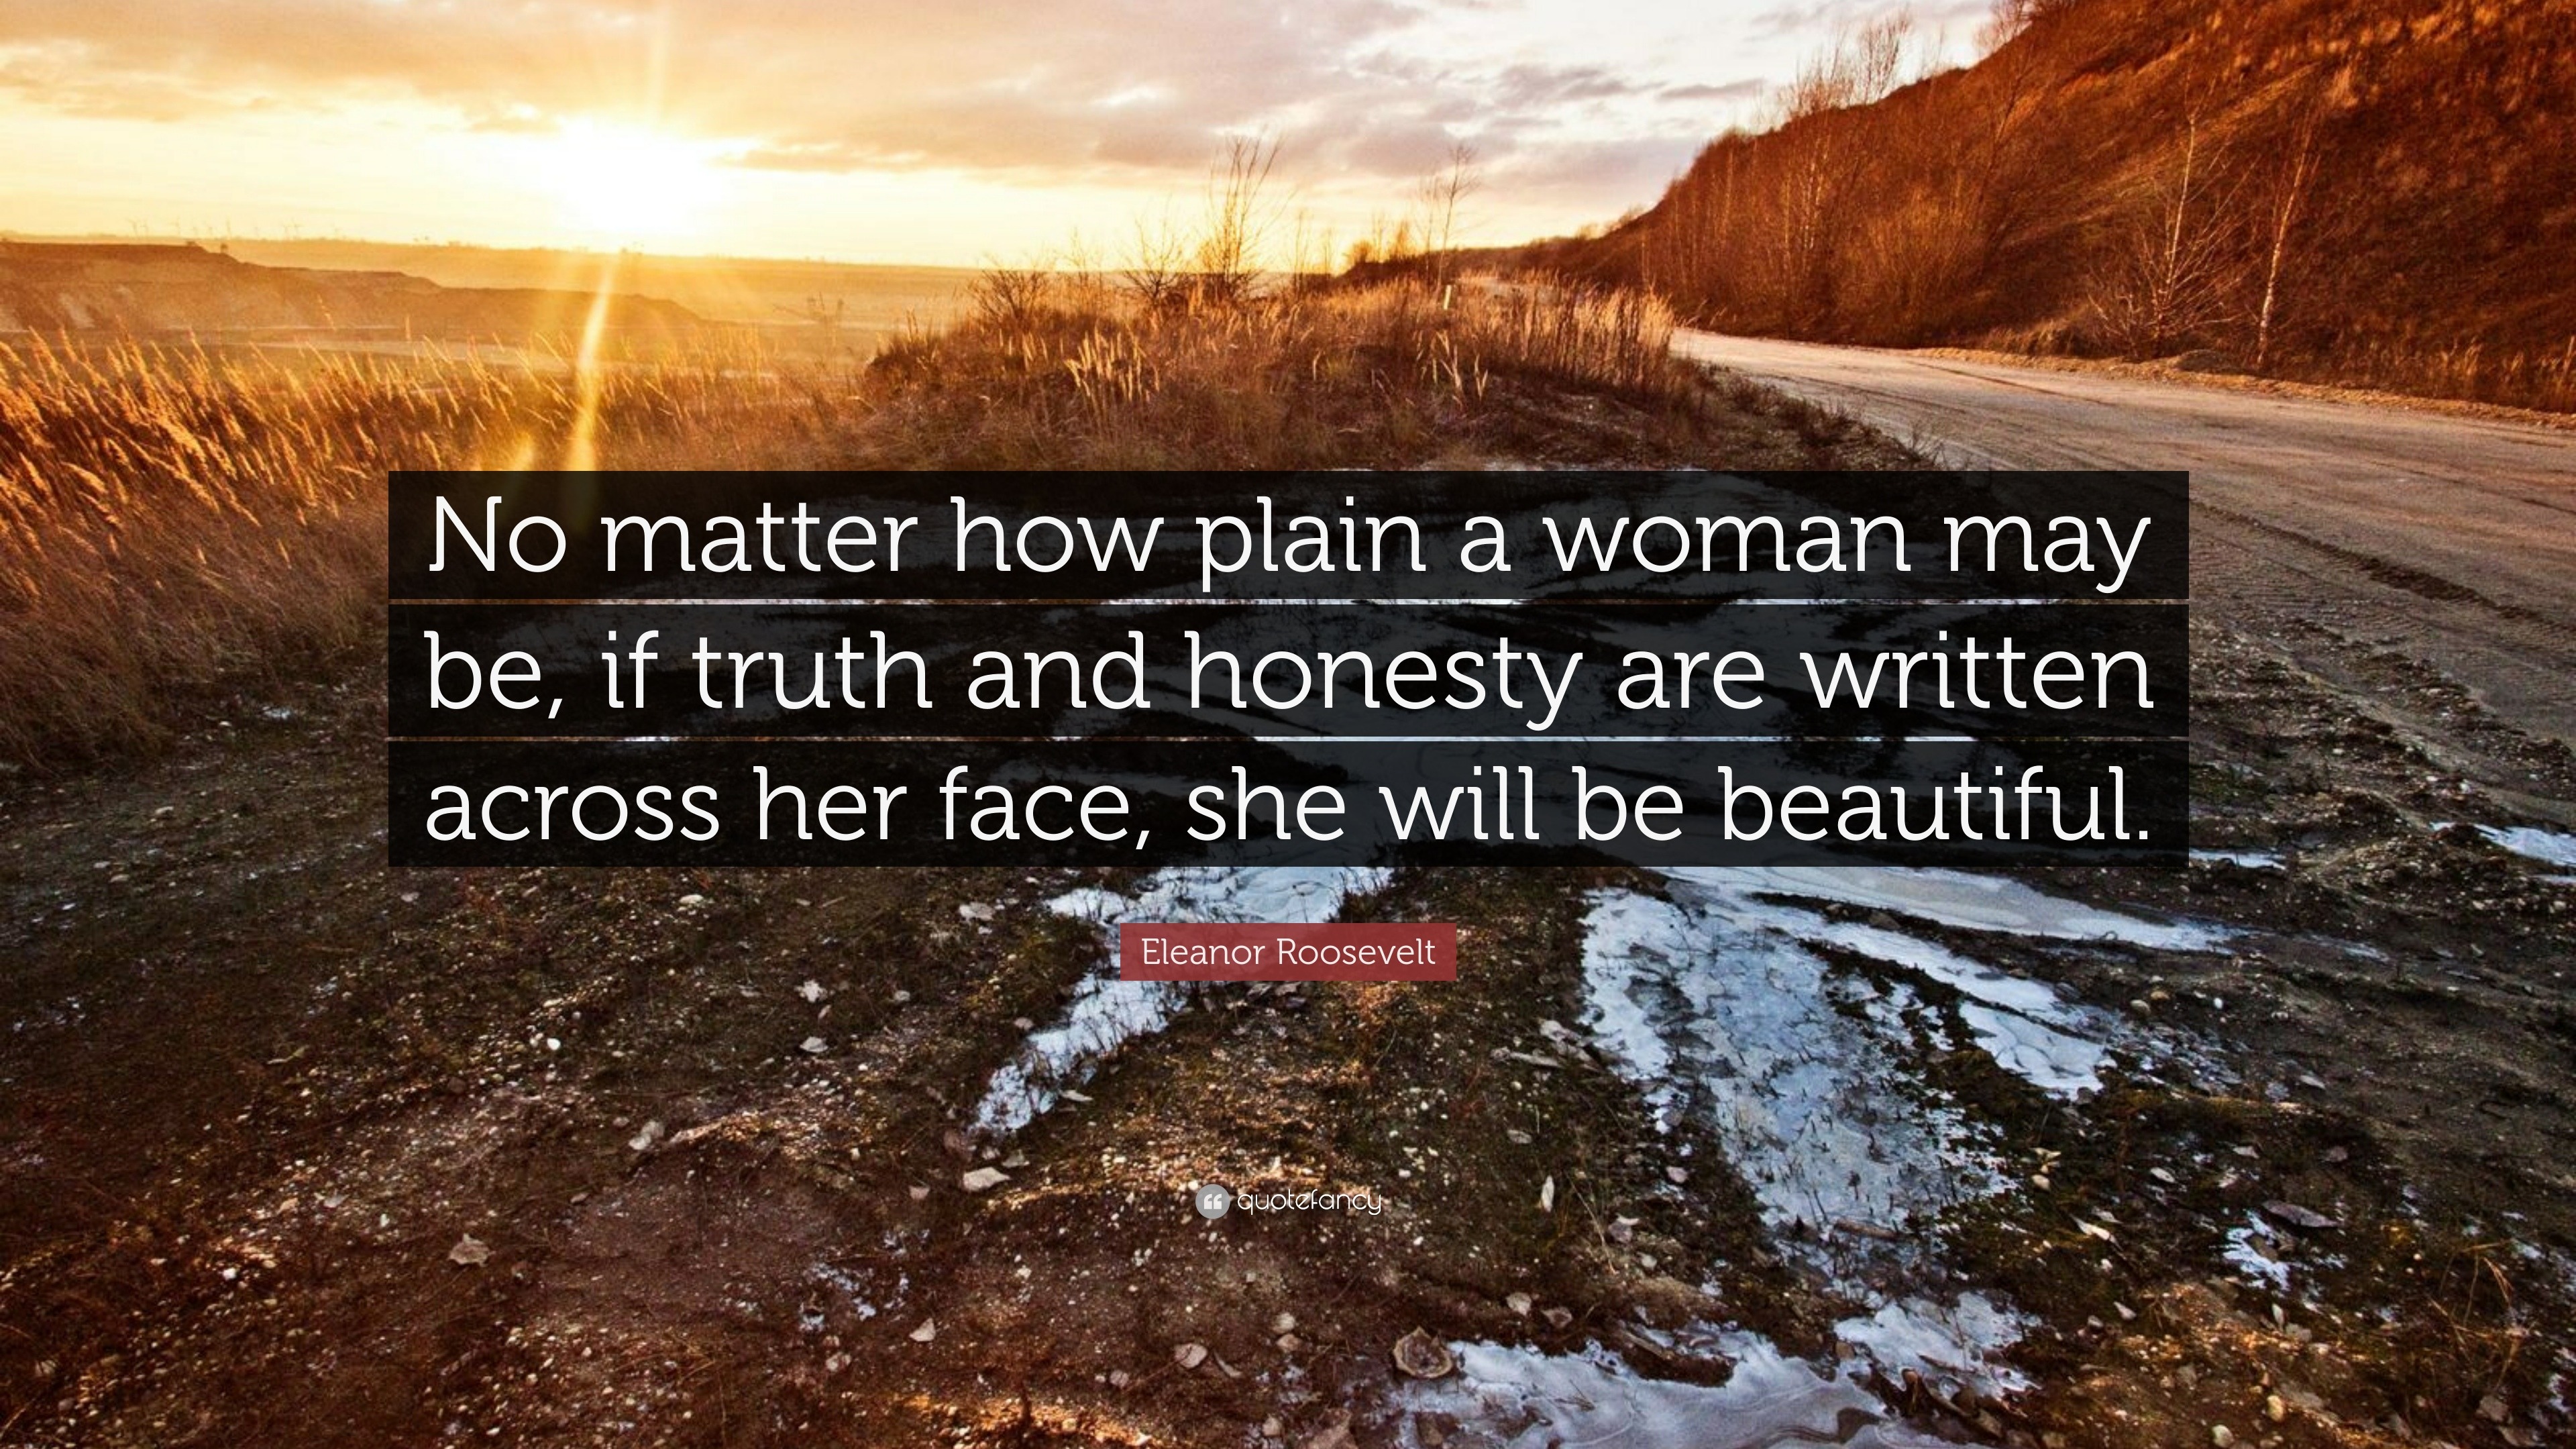 Eleanor Roosevelt Quote “No matter how plain a woman may be if truth